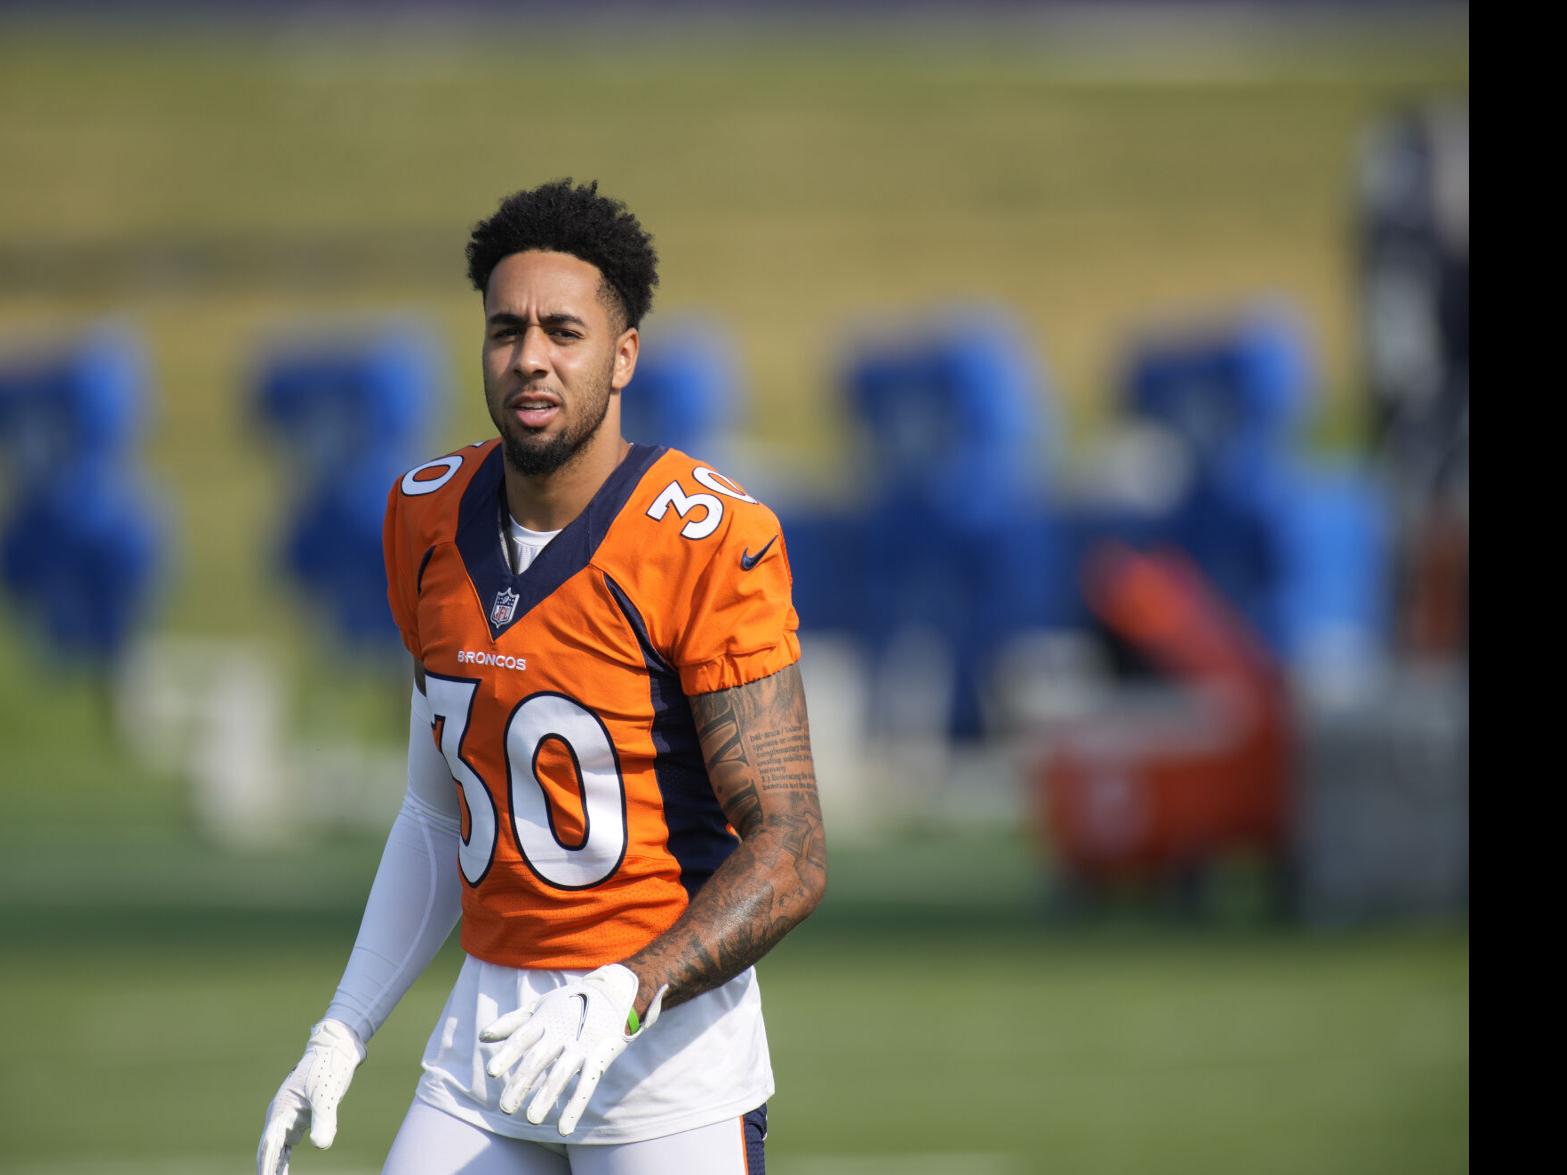 Rookie Caden Sterns, who was 'born to play football,' could be the future  at safety for Denver Broncos, Broncos